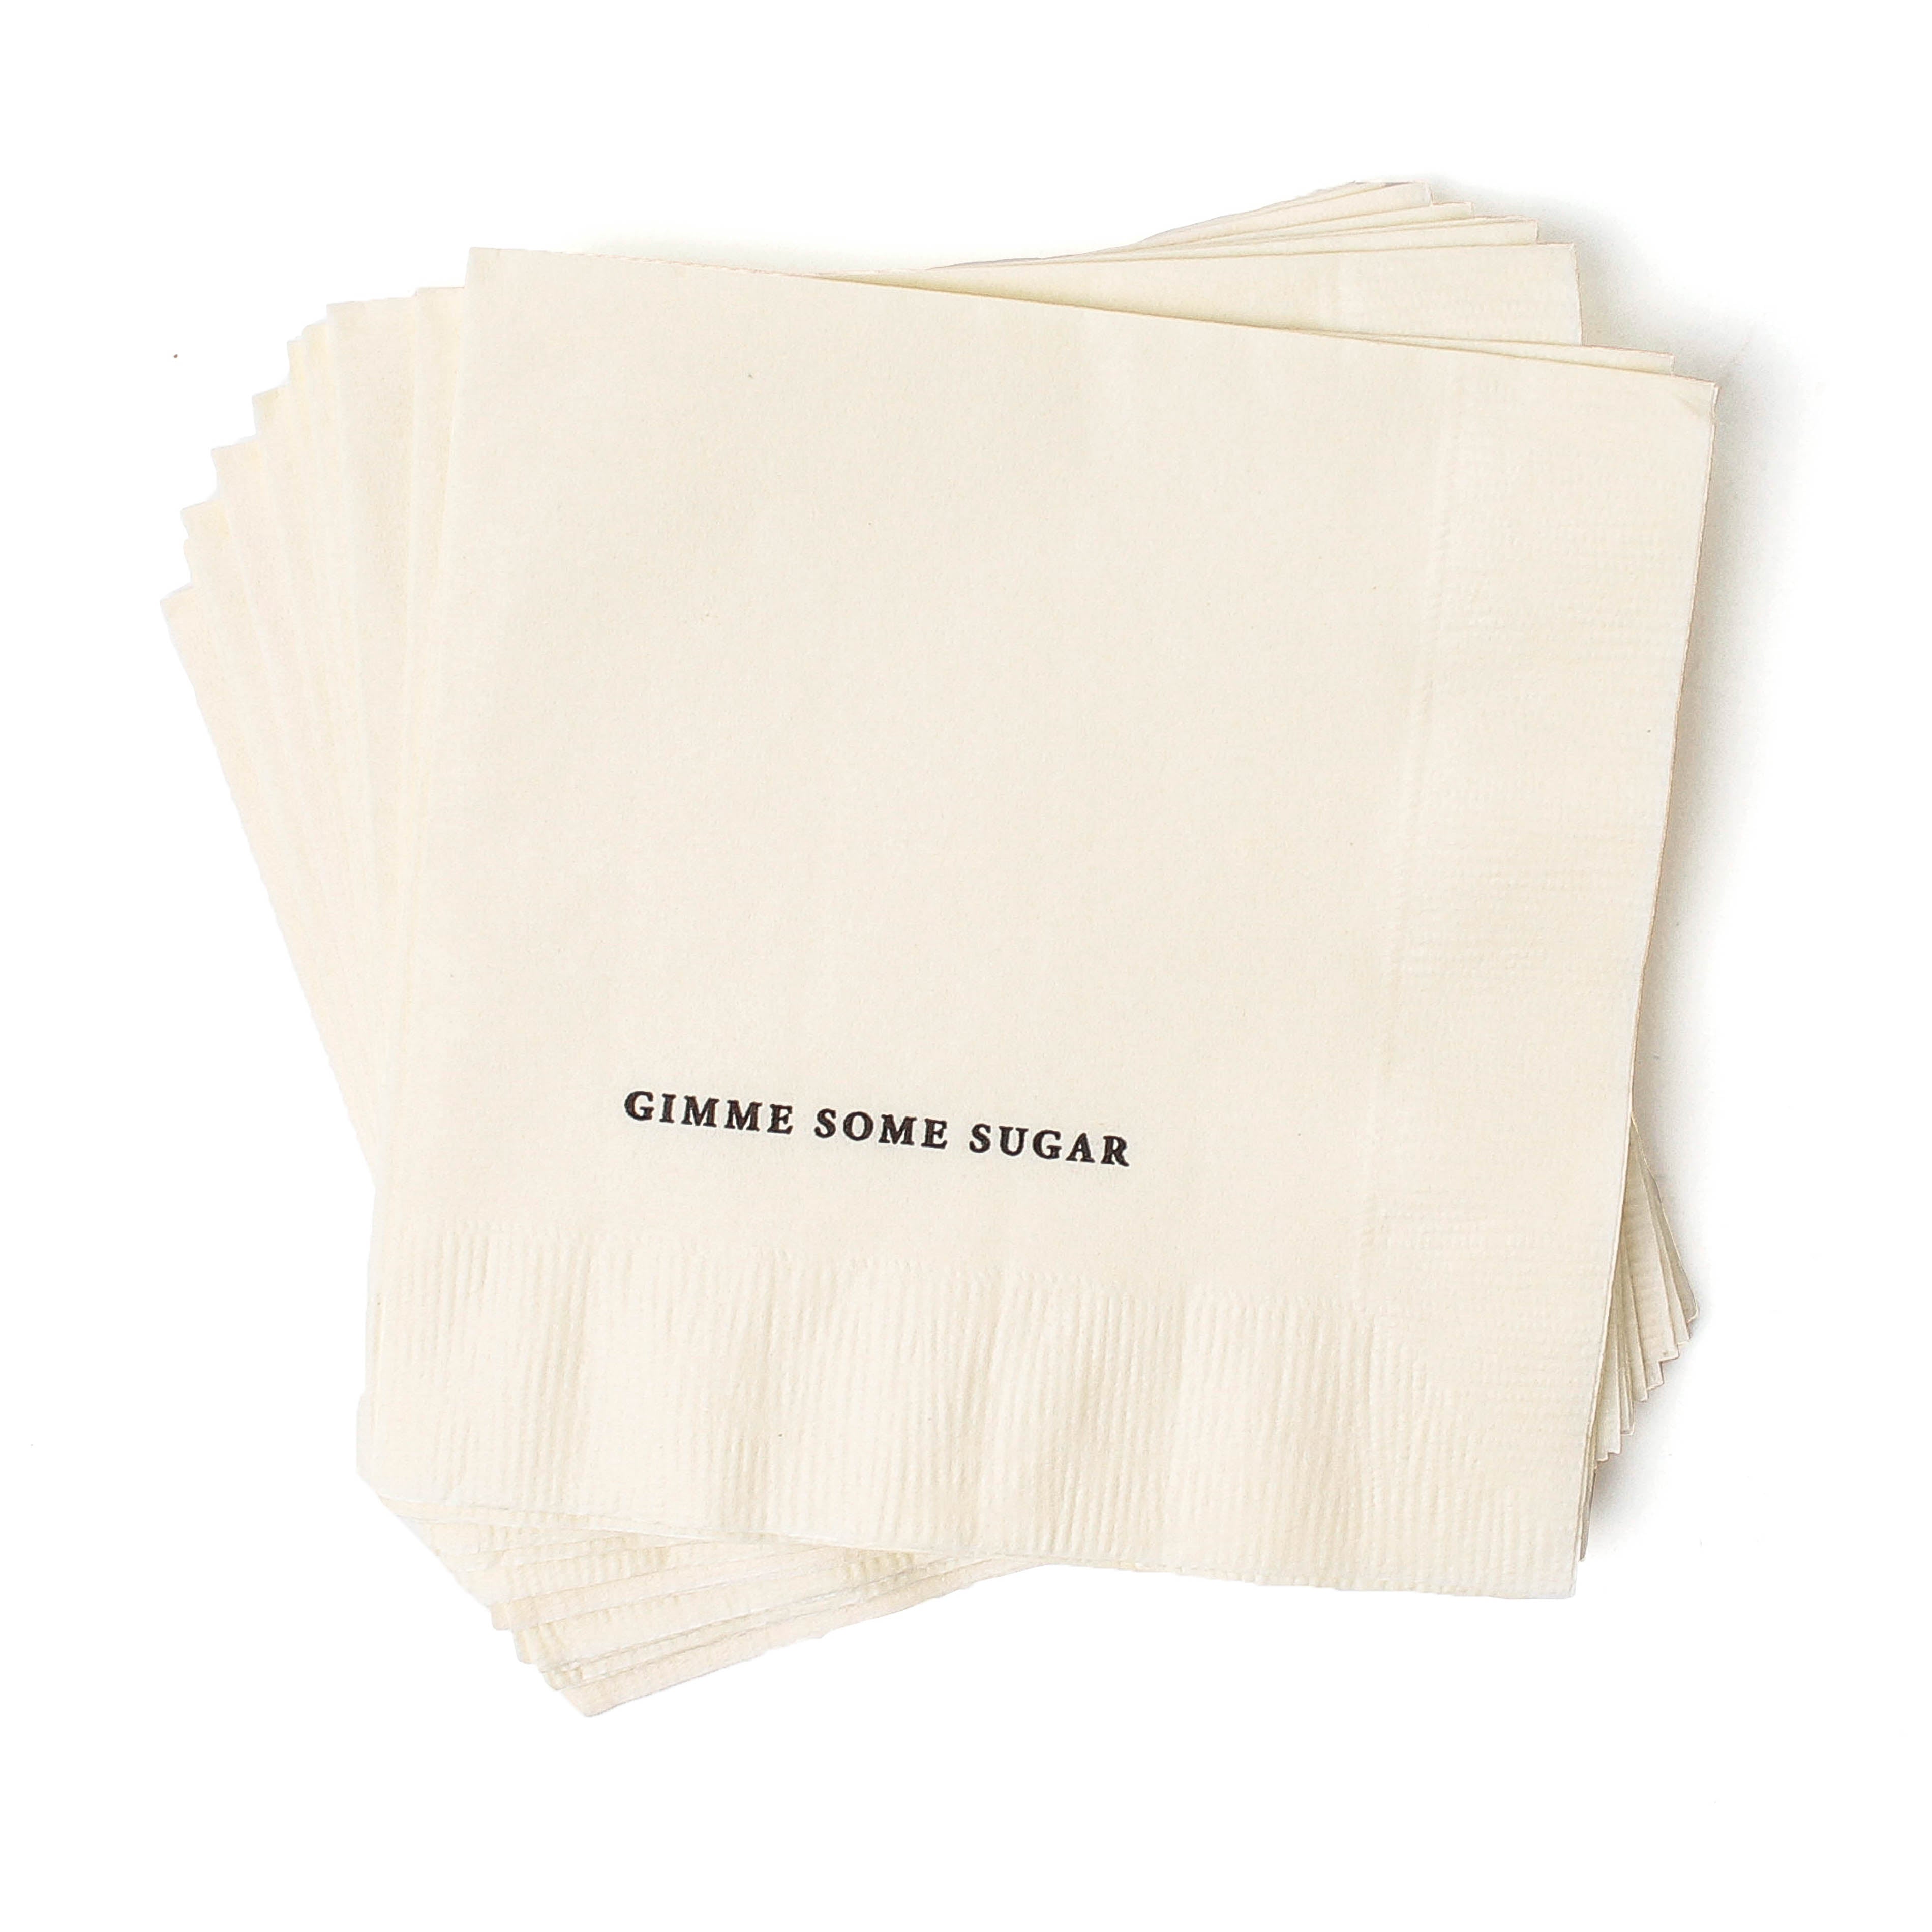 Southern Expression Cocktail Napkins